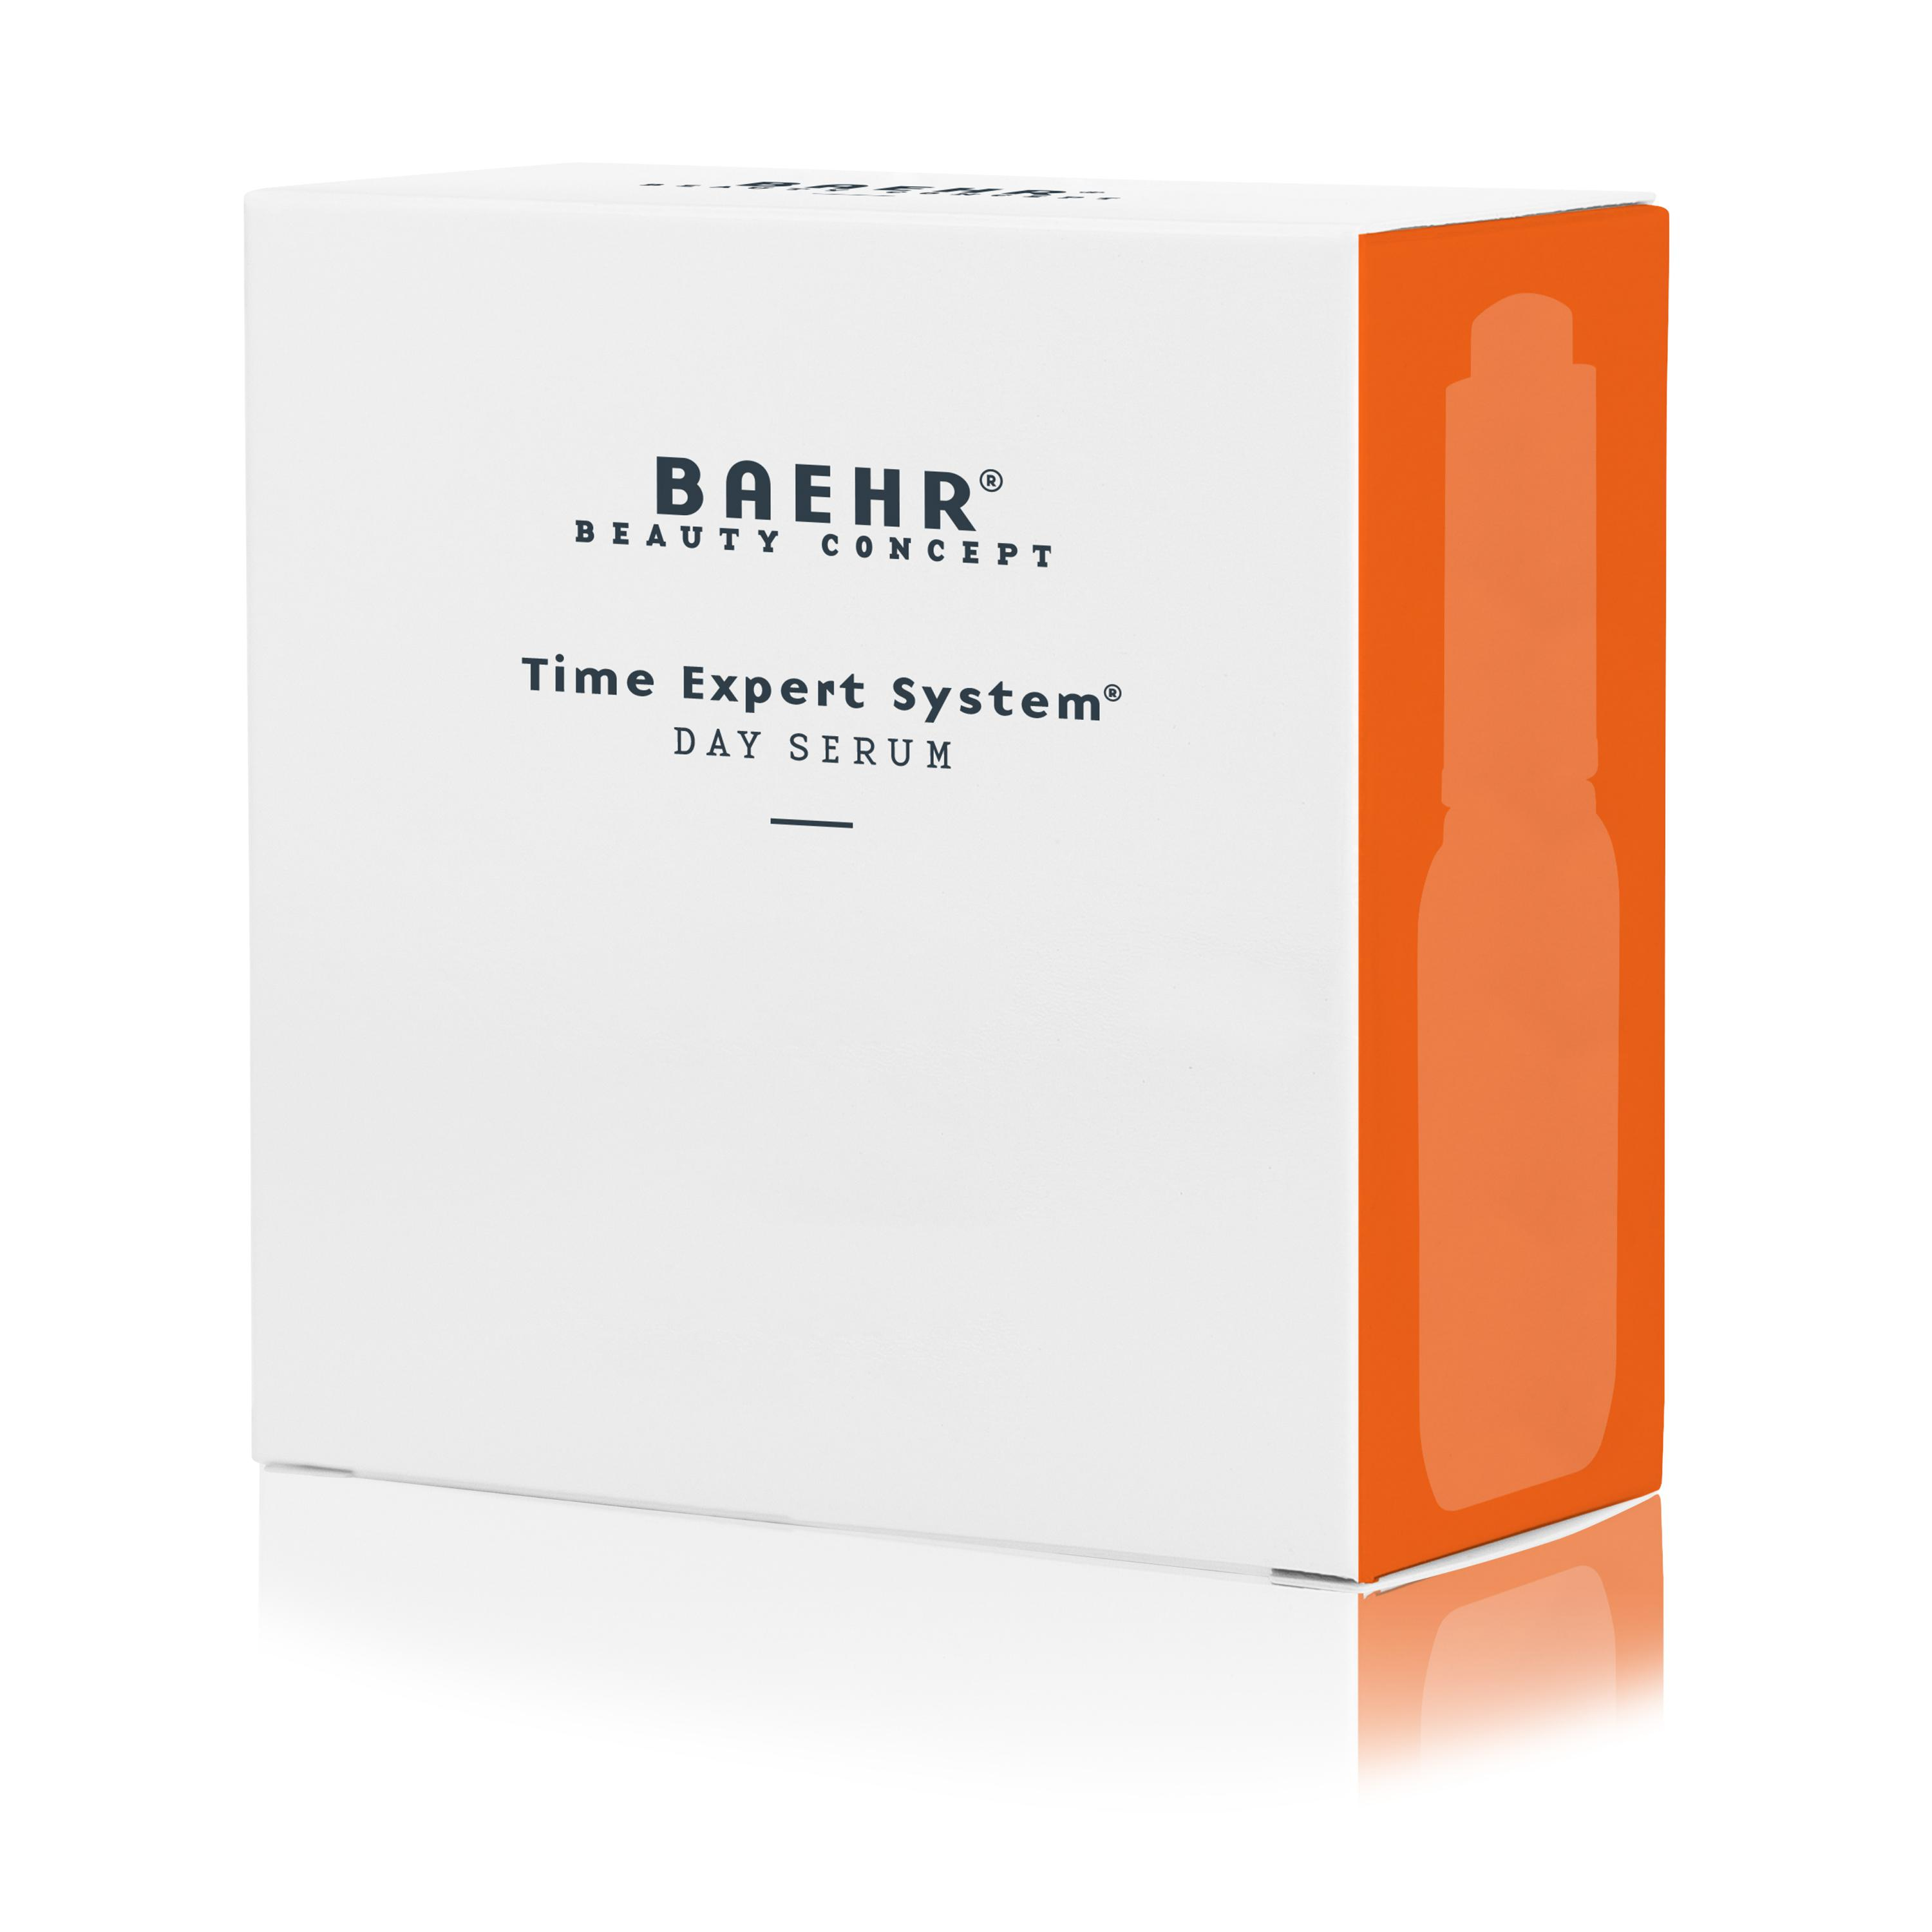 BAEHR BEAUTY CONCEPT Time Expert System | Day Serum 15 ml